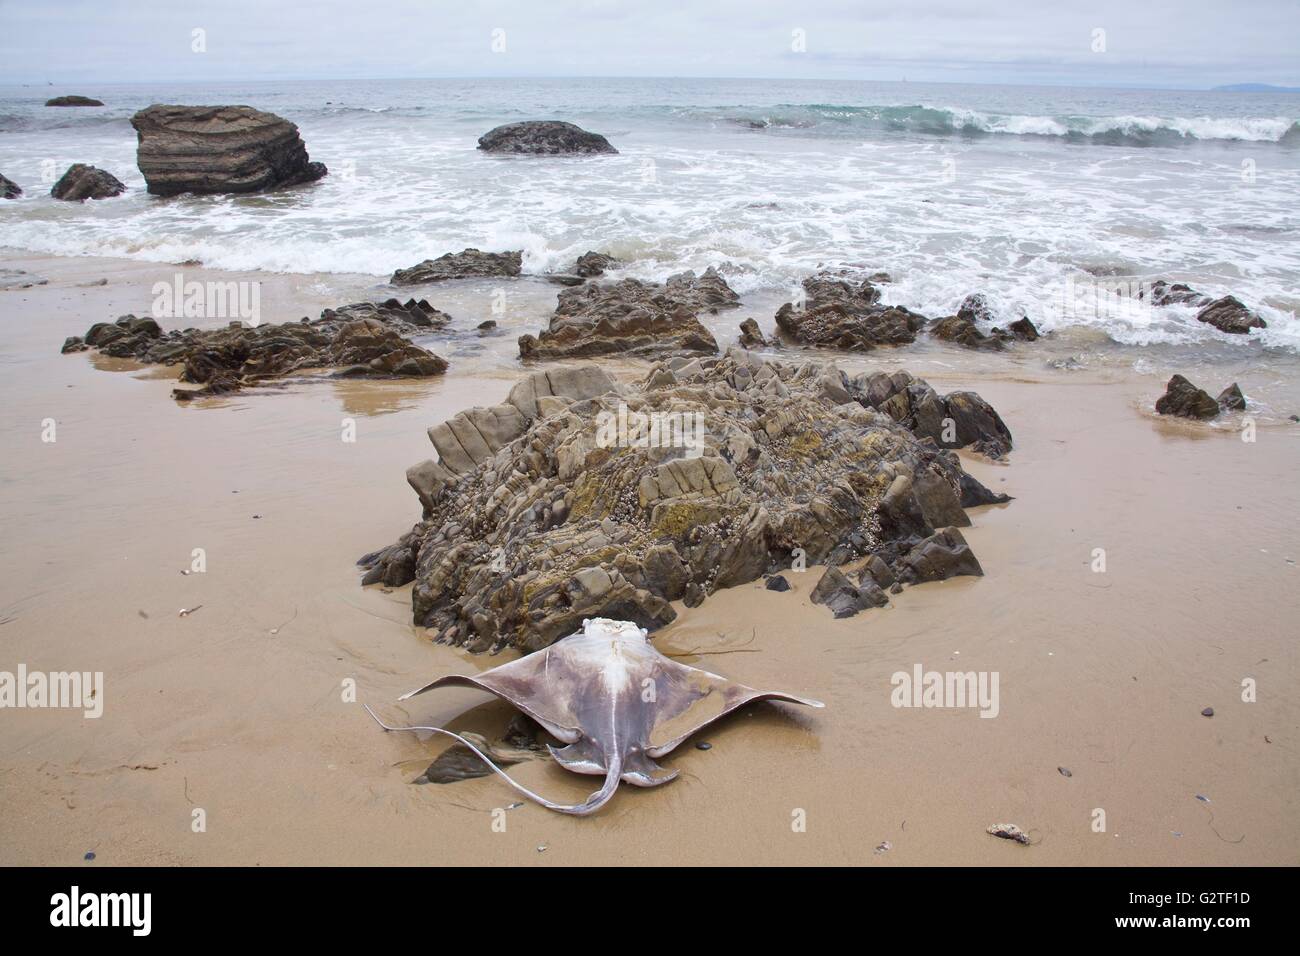 A dead sting ray seems to stretch it wings for flight on a rocky beach